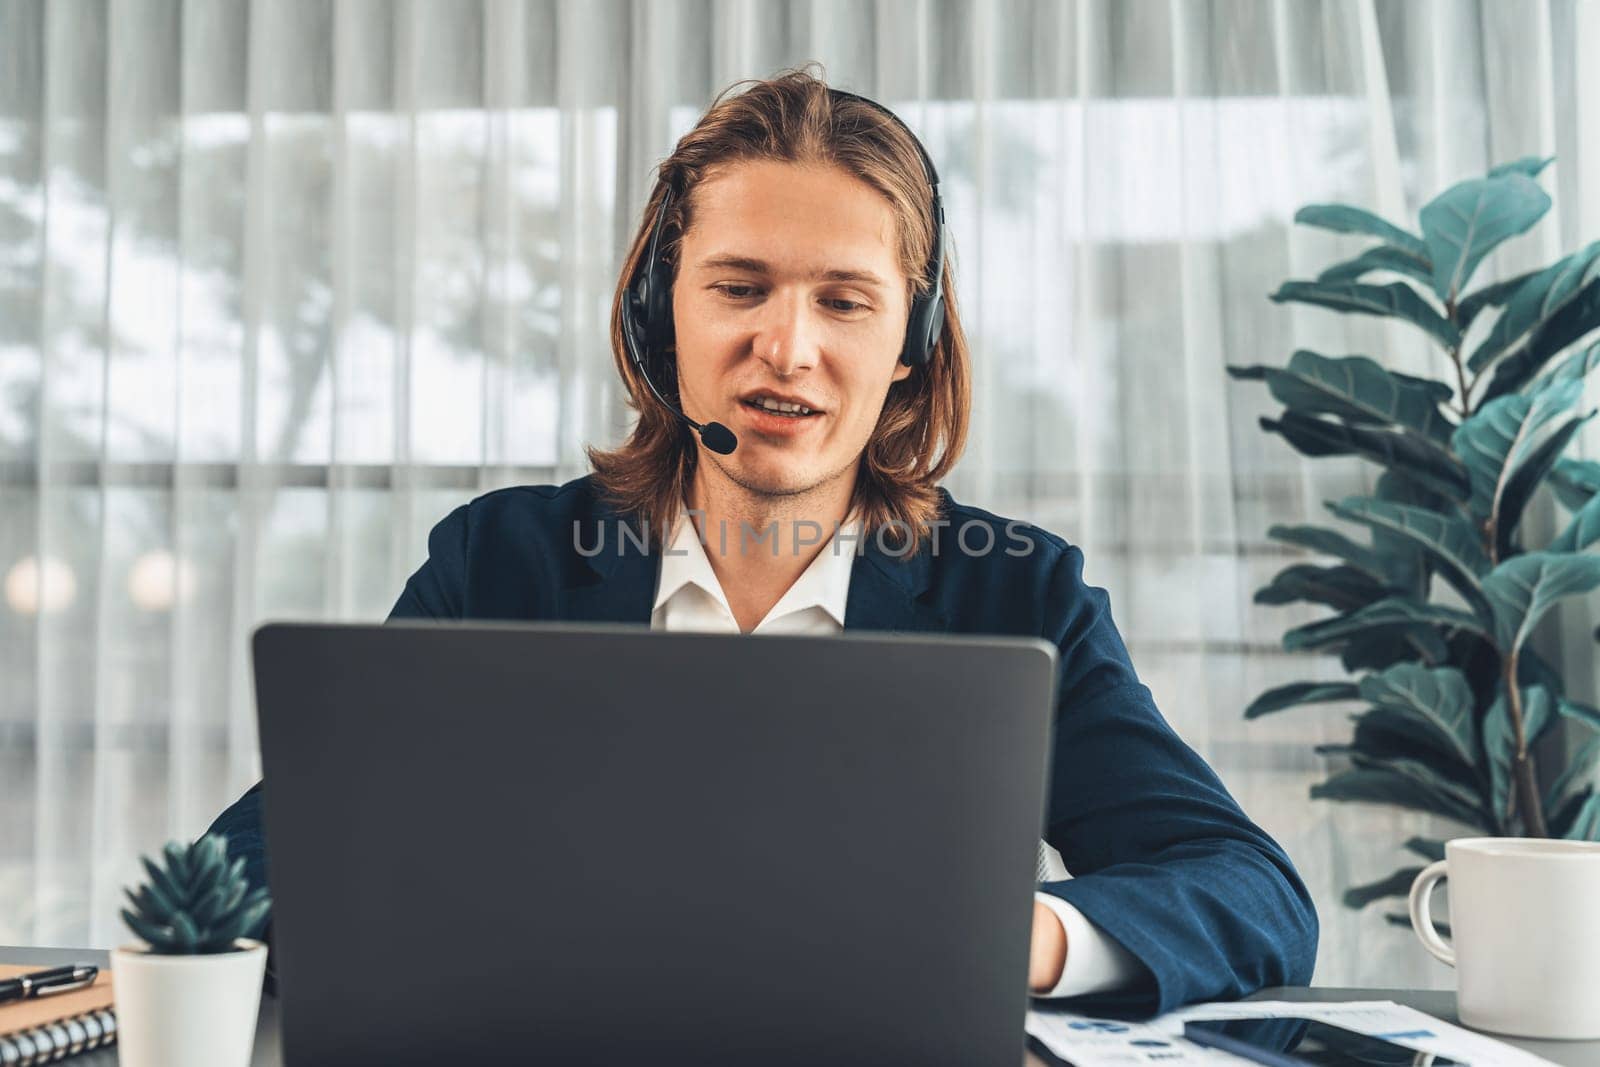 Male customer service operator or telesales agent sitting at desk in office, wearing headset and engage in conversation with client to provide support or close sales. Call center portrait. Entity